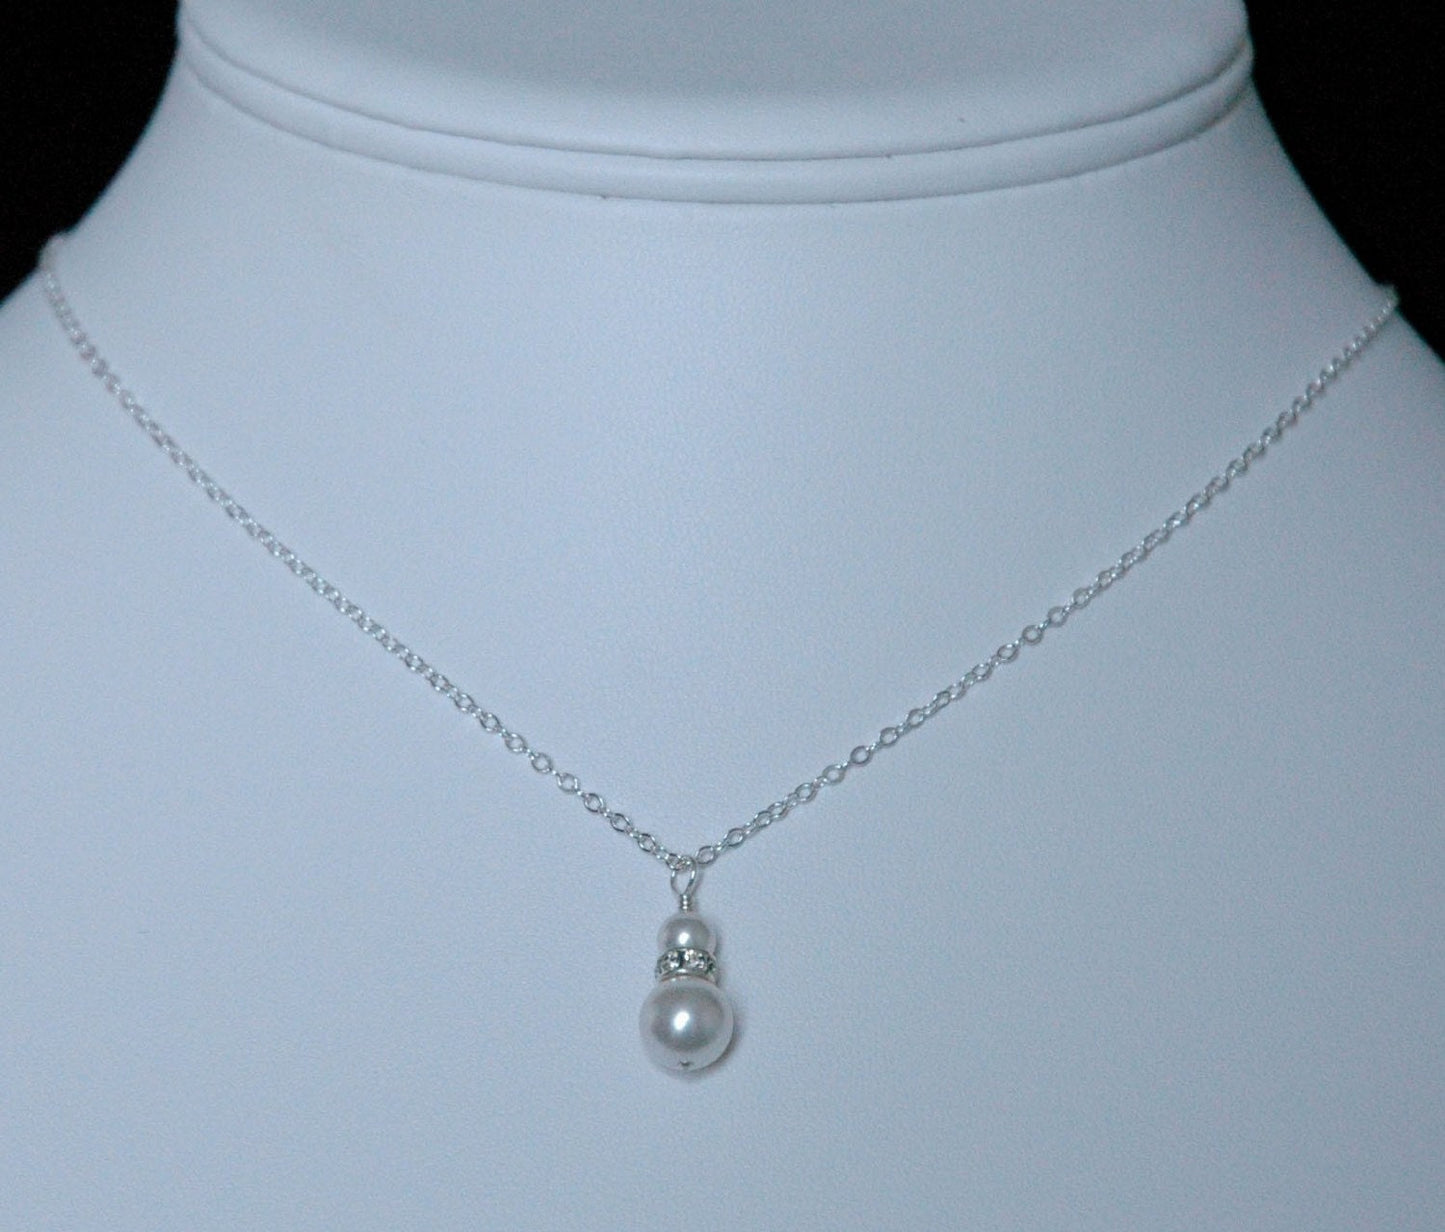 Flower Girl Proposal Crystal Pearl Necklace,Will You Be My Flower Girl Necklace